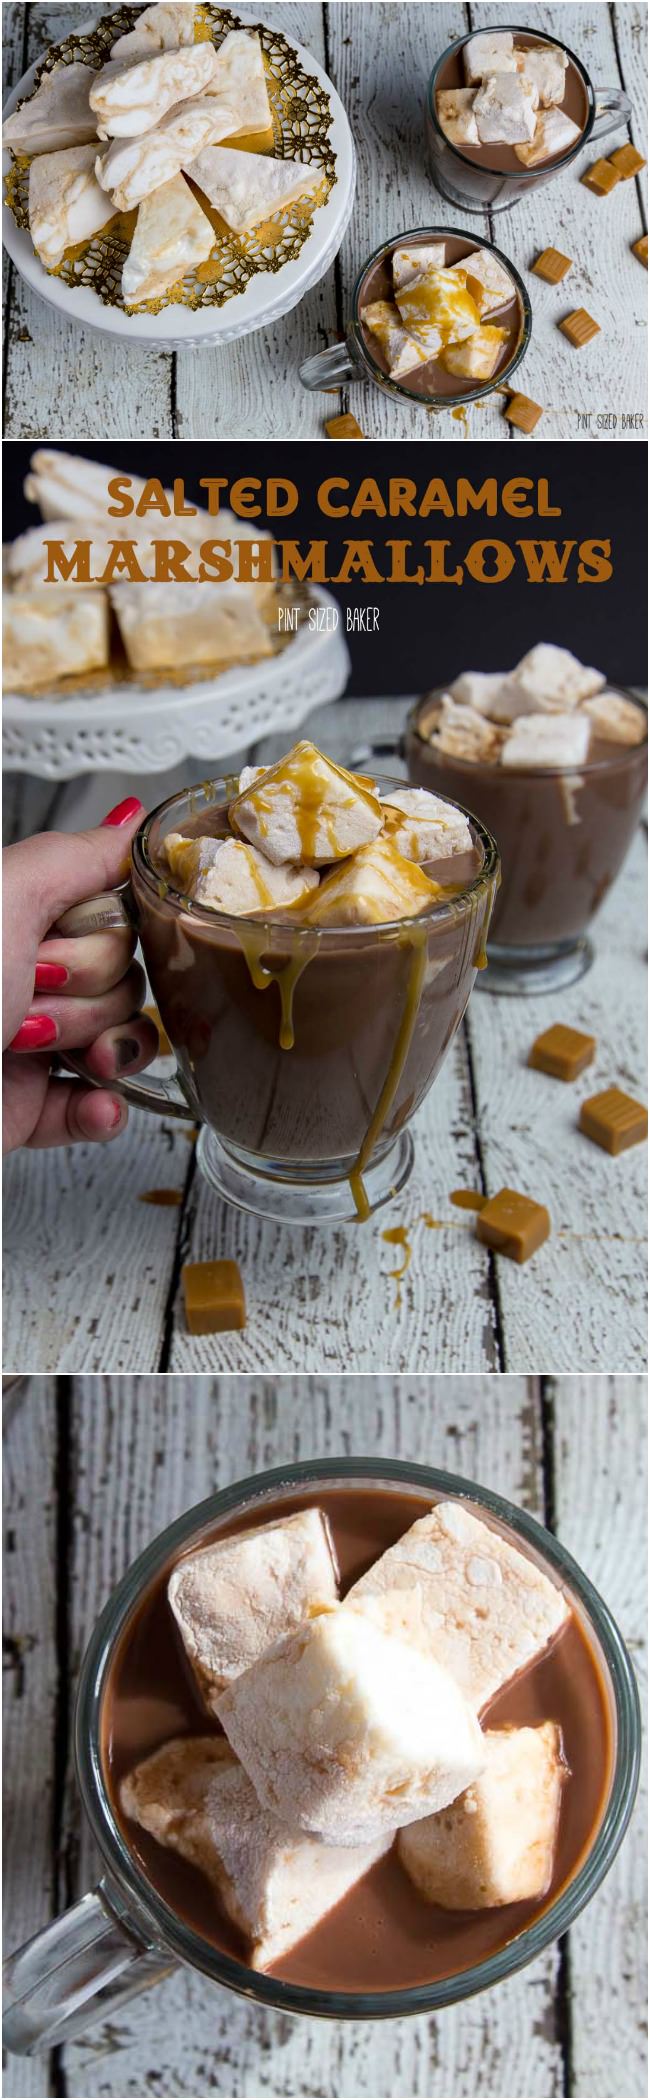 This fall make some Homemade Salted Caramel Marshmallows for your hot chocolate and dessert recipes. It's busting with sweet flavor!